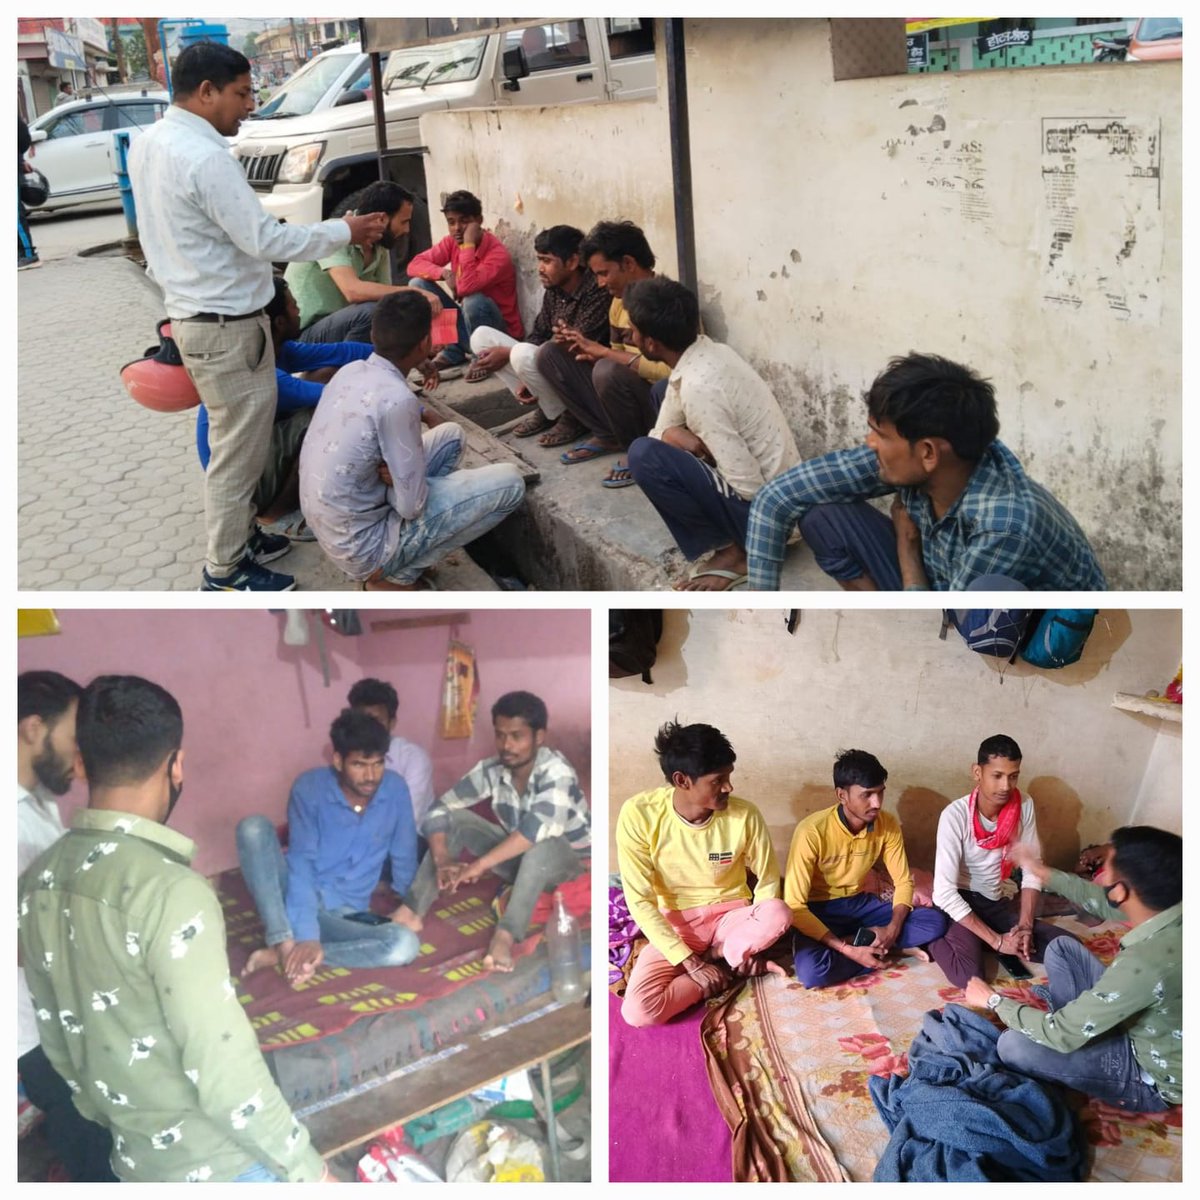 USACS through T.I NGO PASS conducted a group discussion and information regarding HIV/AIDS, STI/RTI, T.B, Spouse Testing & information about various schemes for migrants was communicated to migrants by the Counsellors & Out Reach Workers of T.I Ngo & IEC Materials was distributed